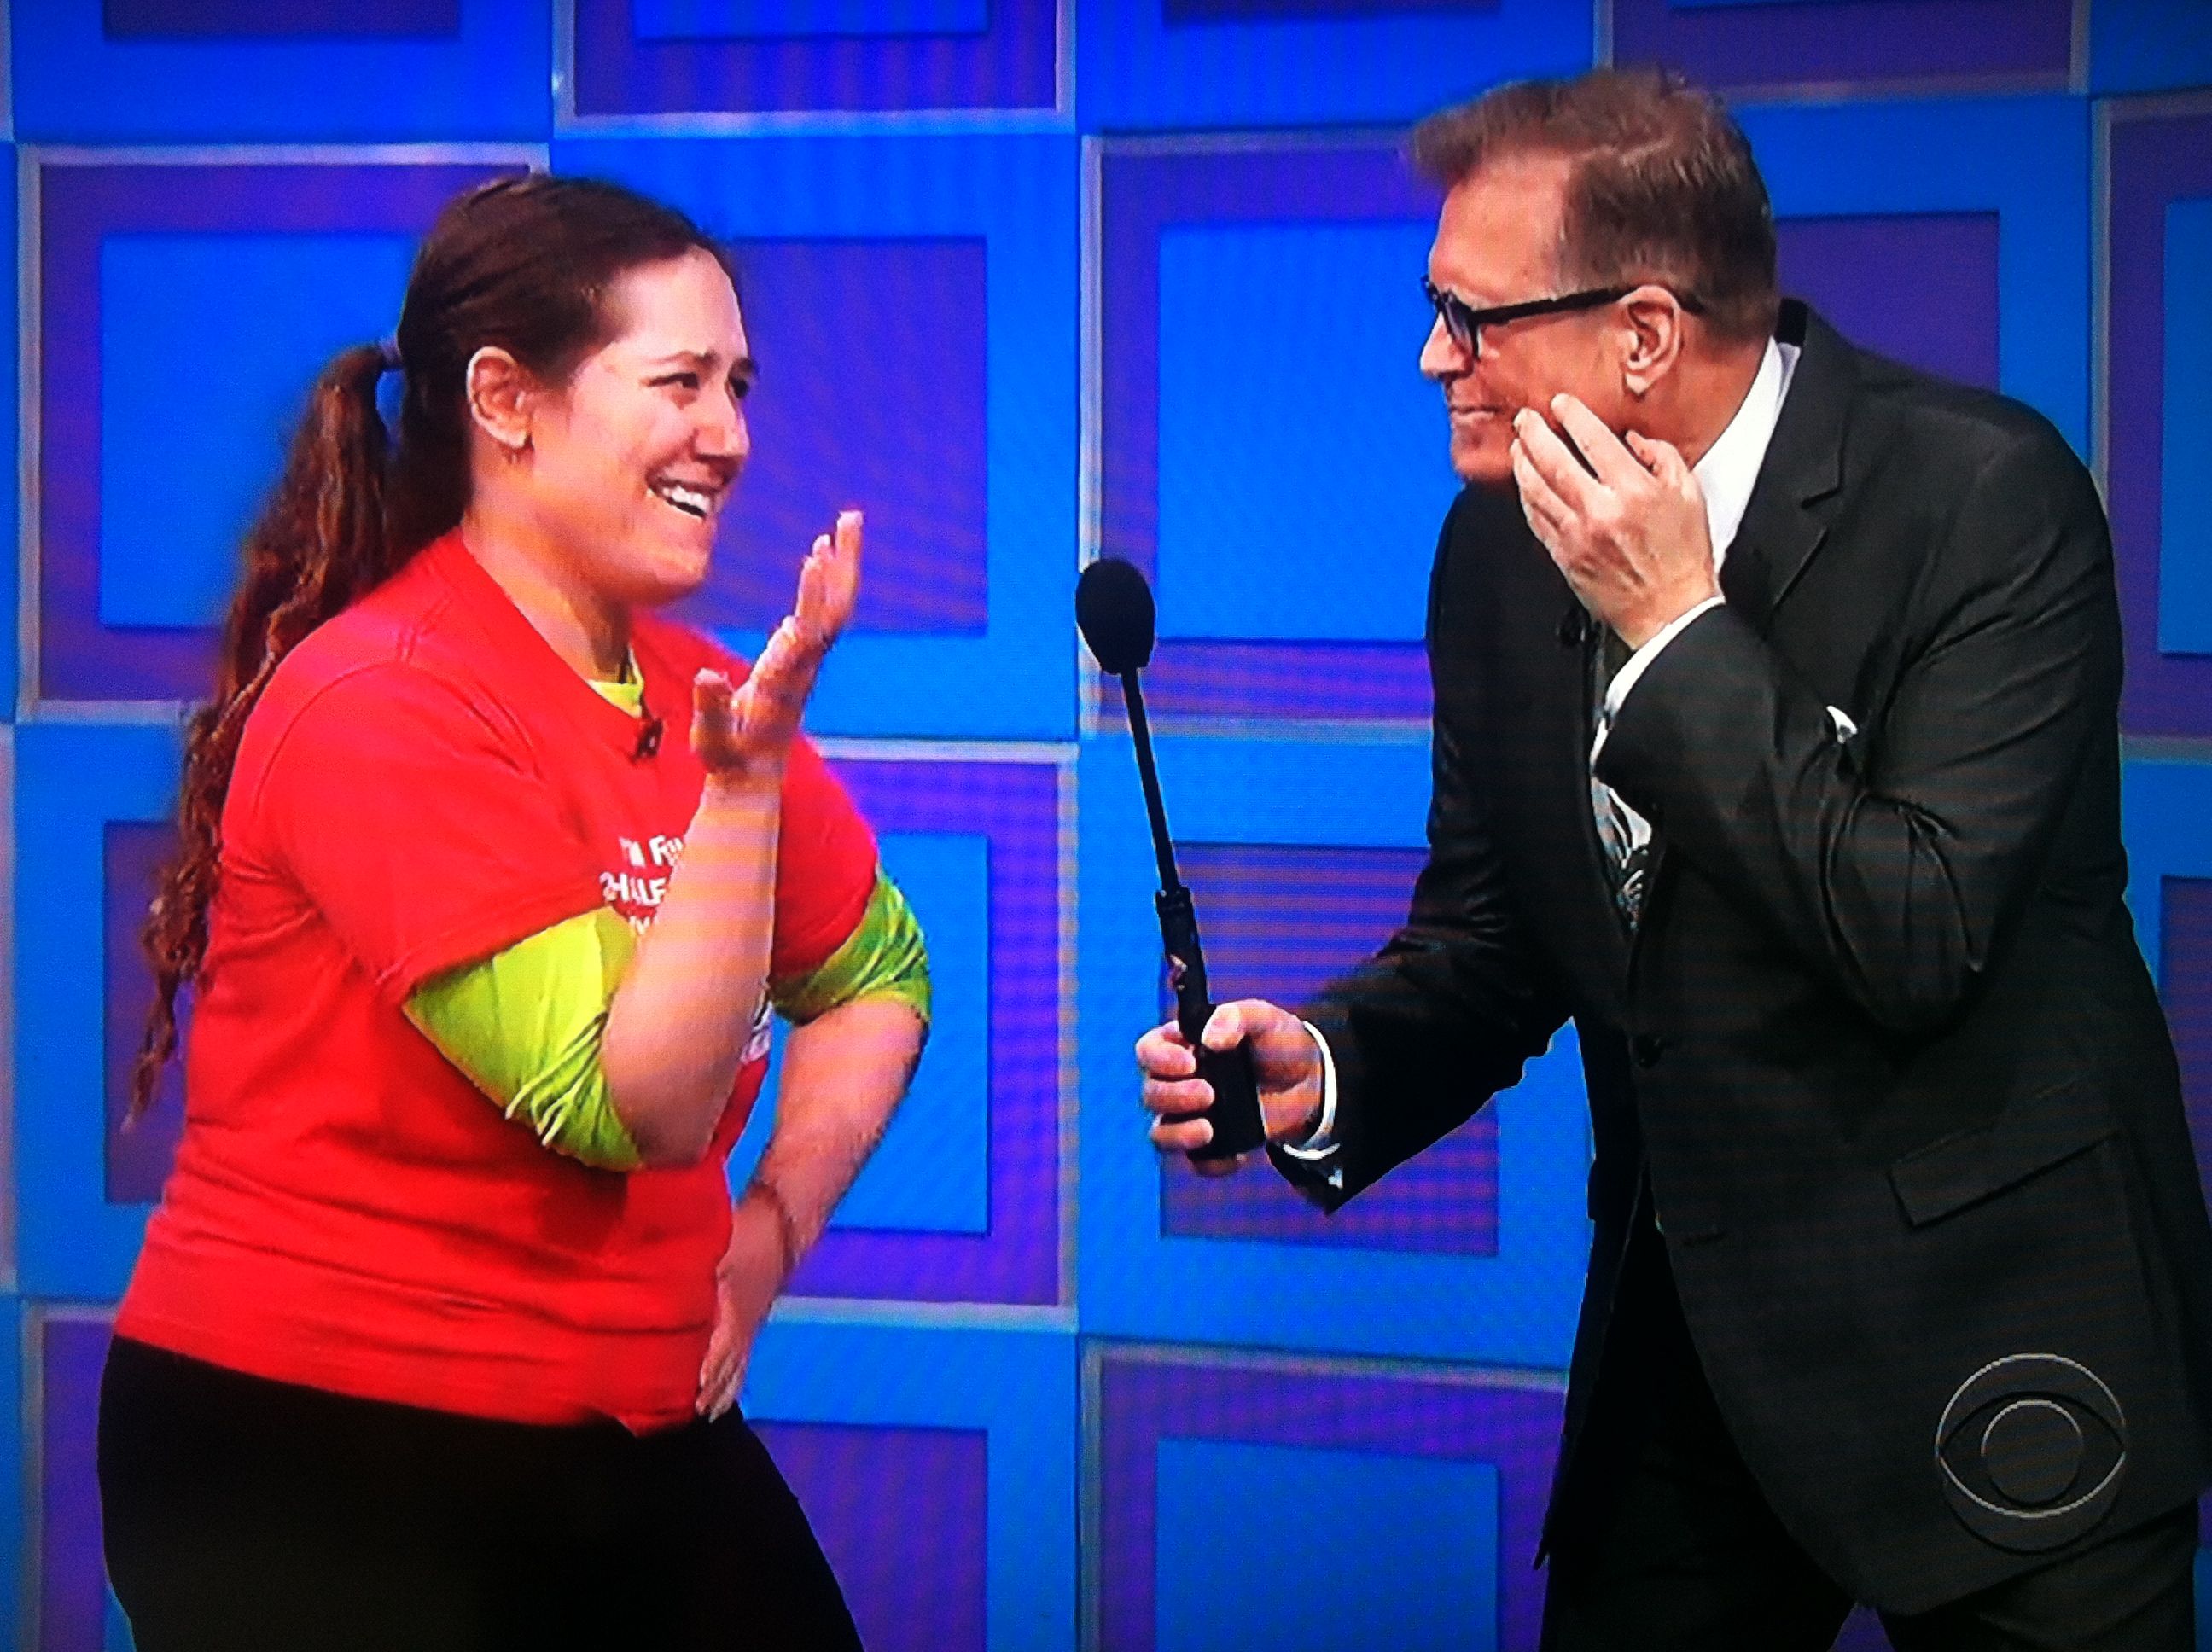 Aurora De Lucia and Drew Carey with their thinking faces on at The Price is Right